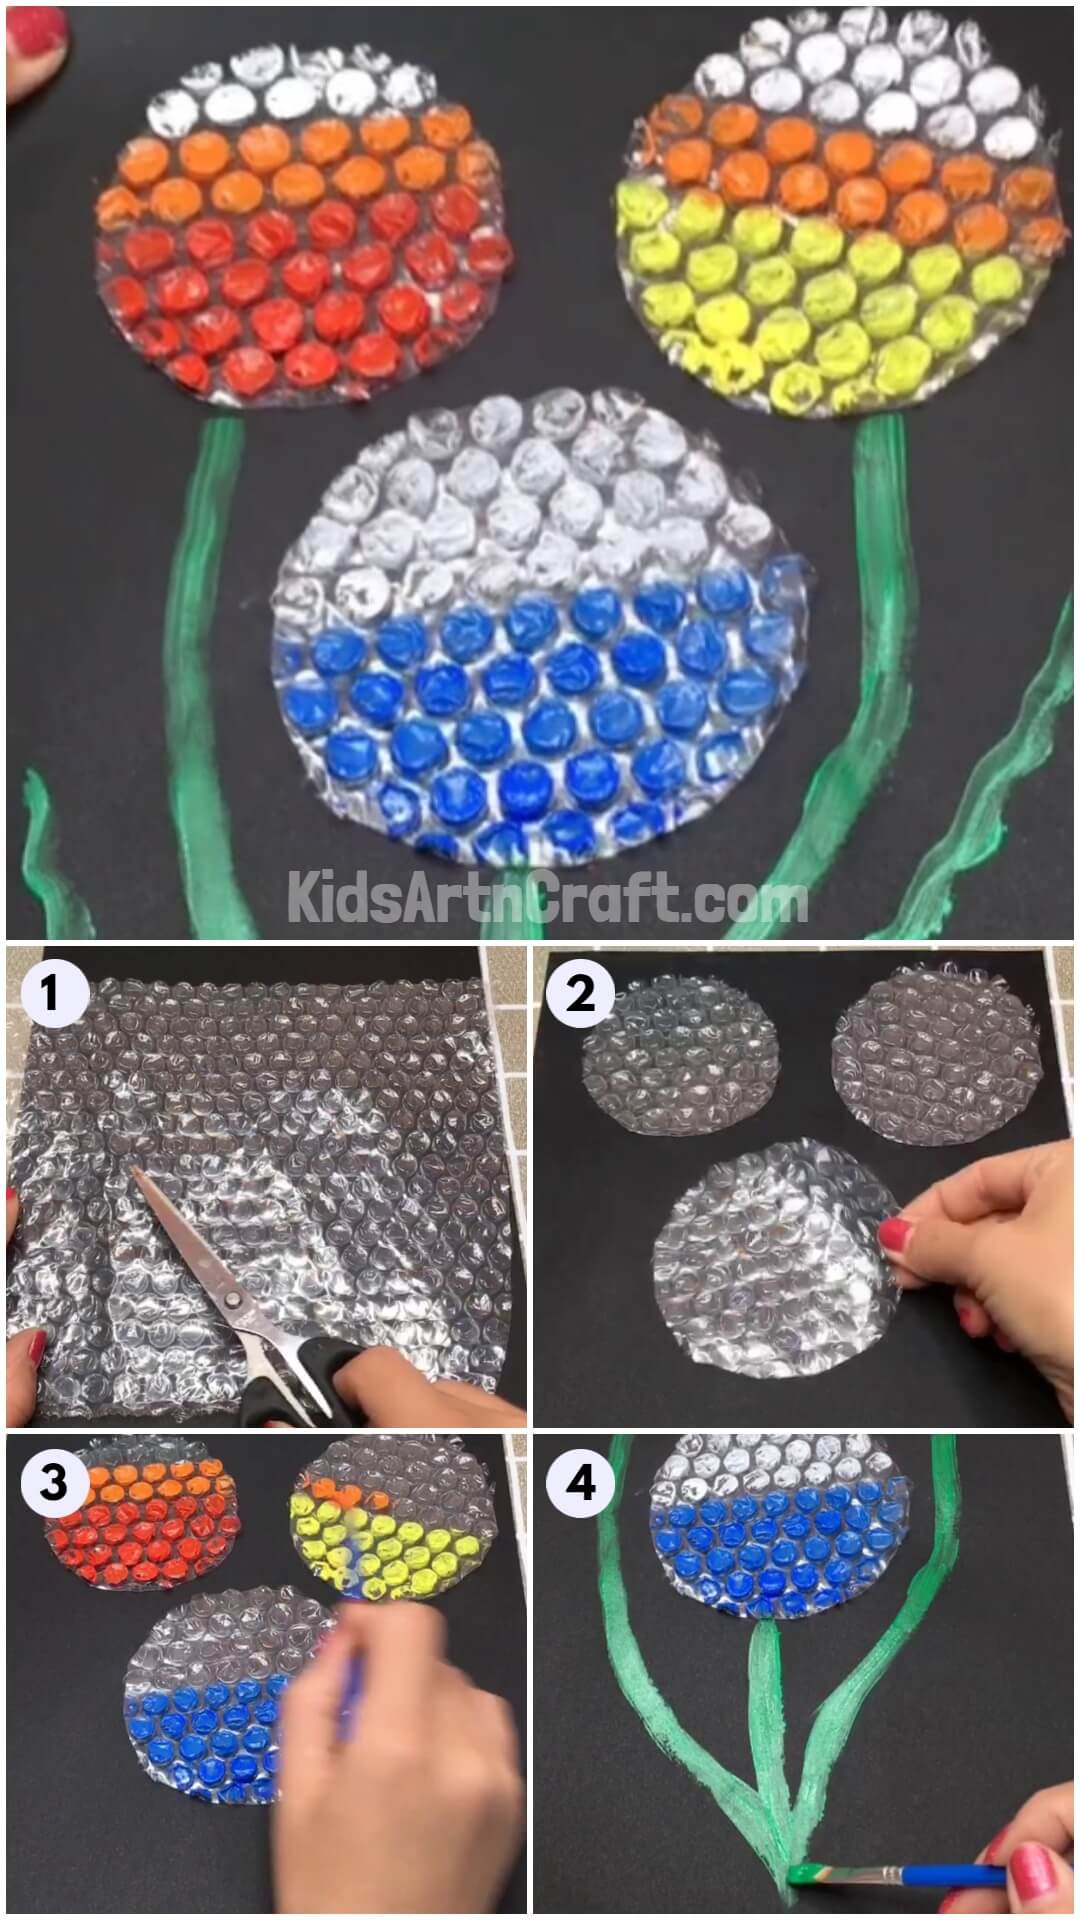  Easy To Make Bubble Wrap Flower Craft For Kids- Step By Step Tutorial